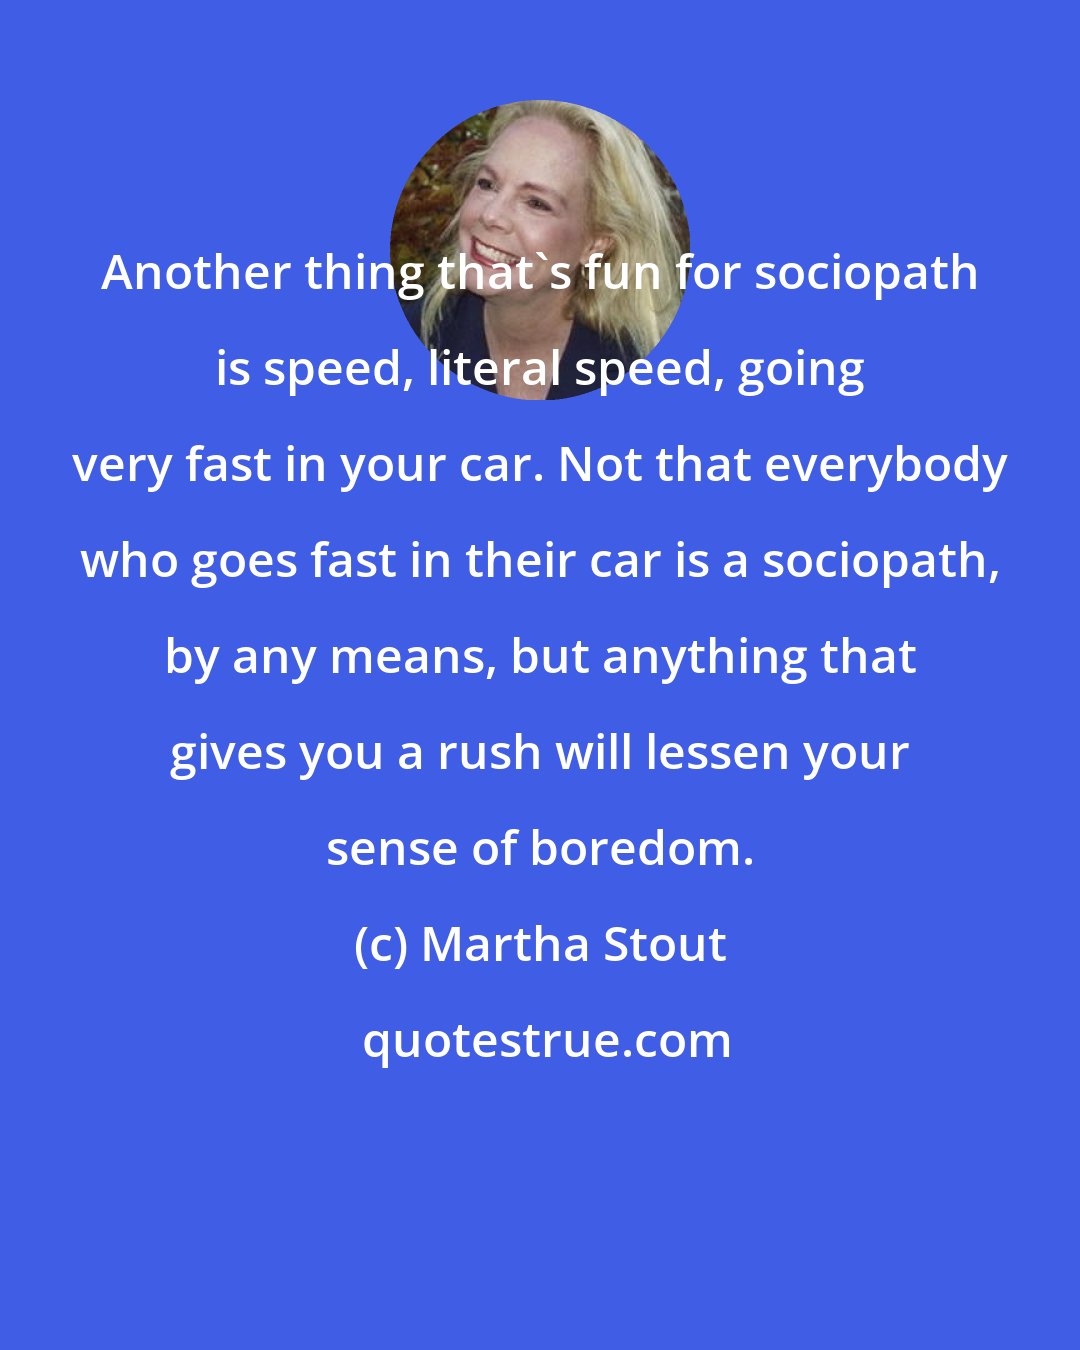 Martha Stout: Another thing that's fun for sociopath is speed, literal speed, going very fast in your car. Not that everybody who goes fast in their car is a sociopath, by any means, but anything that gives you a rush will lessen your sense of boredom.